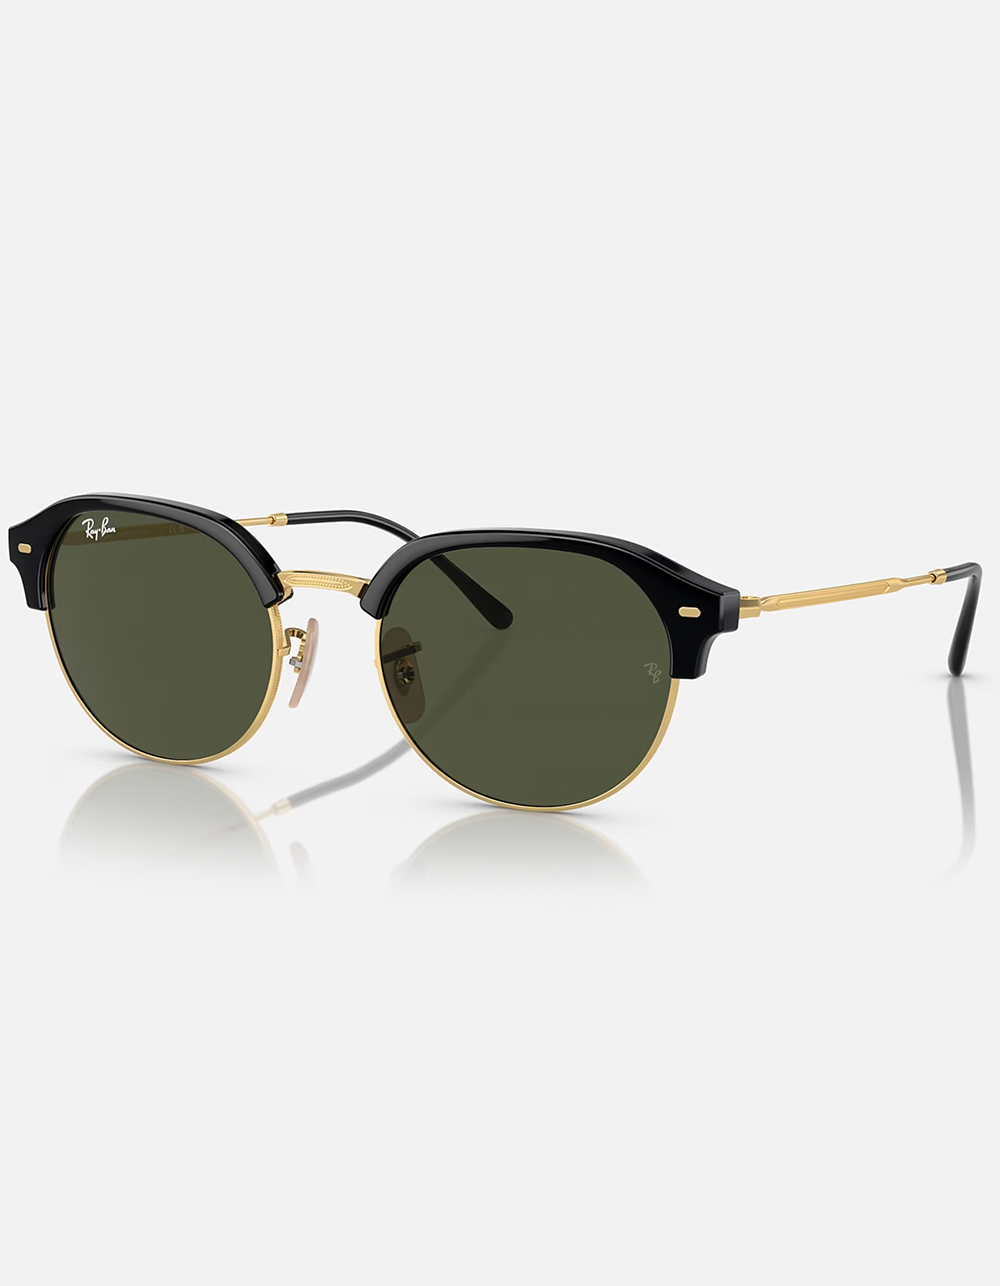 RAY-BAN RB4429 Clubmaster Sunglasses